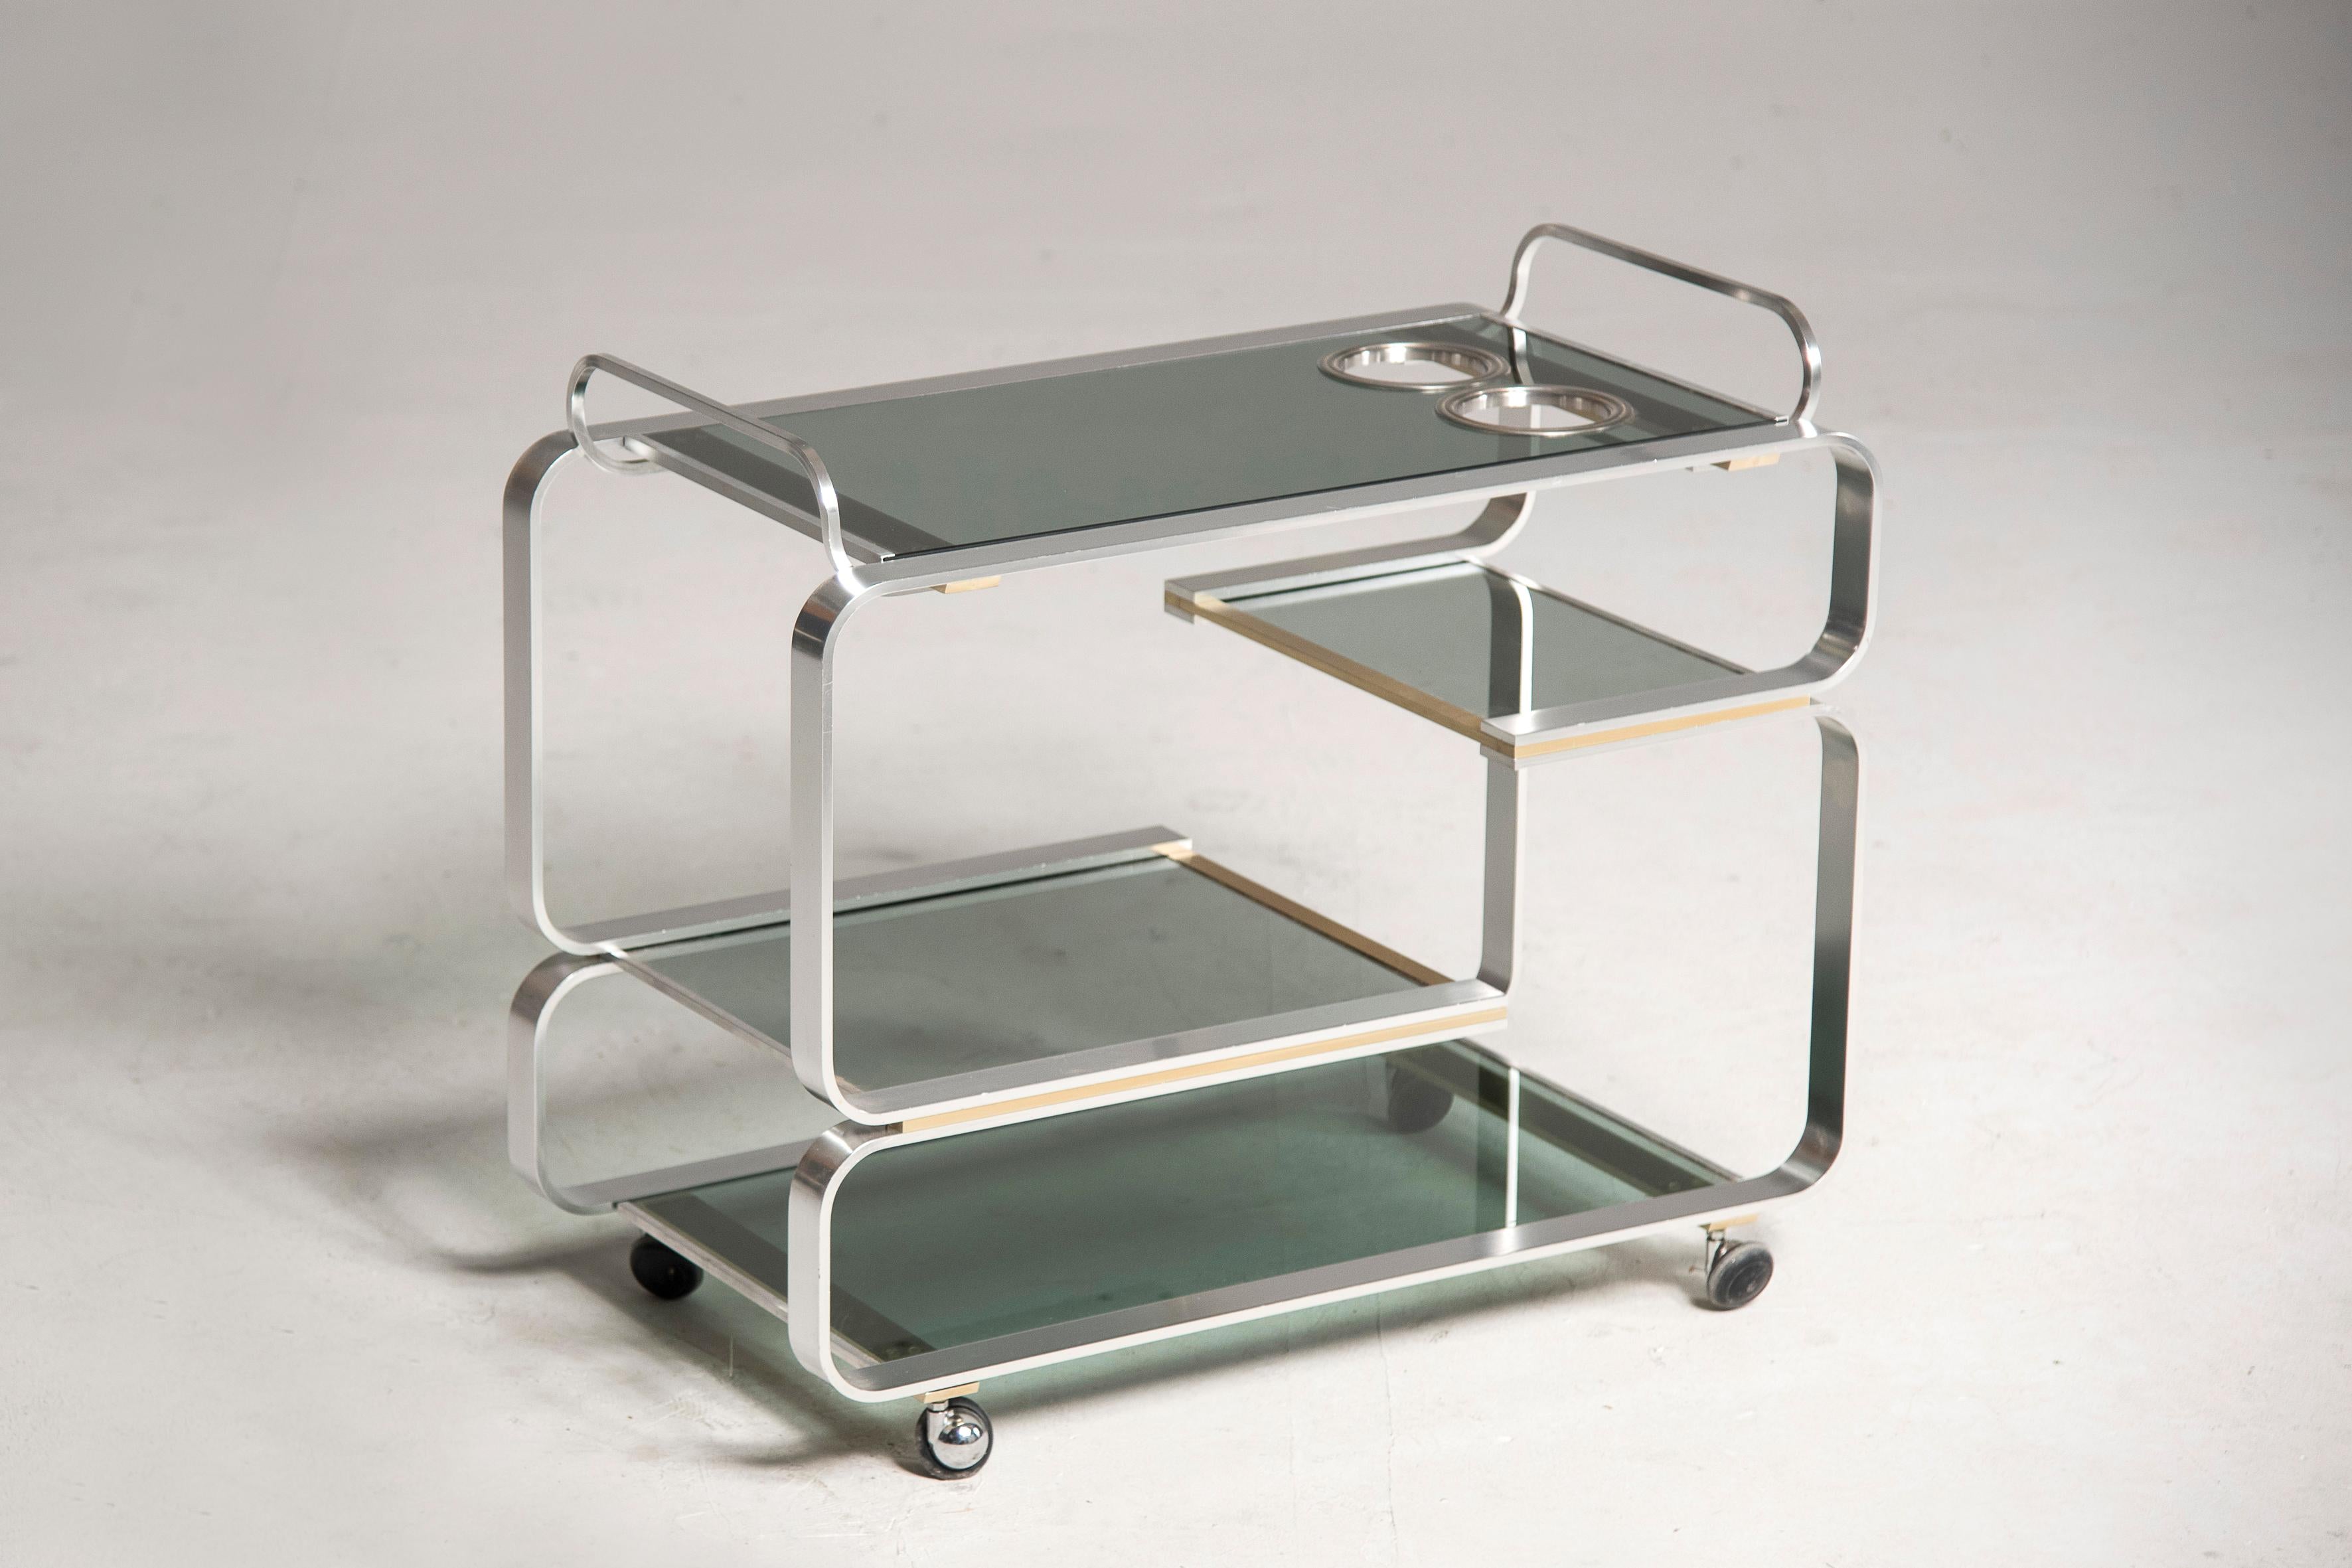 1970s tray with wheels and structure in steel and brass
On the upper shelf there are two bottle holders
Measures to be confirmed